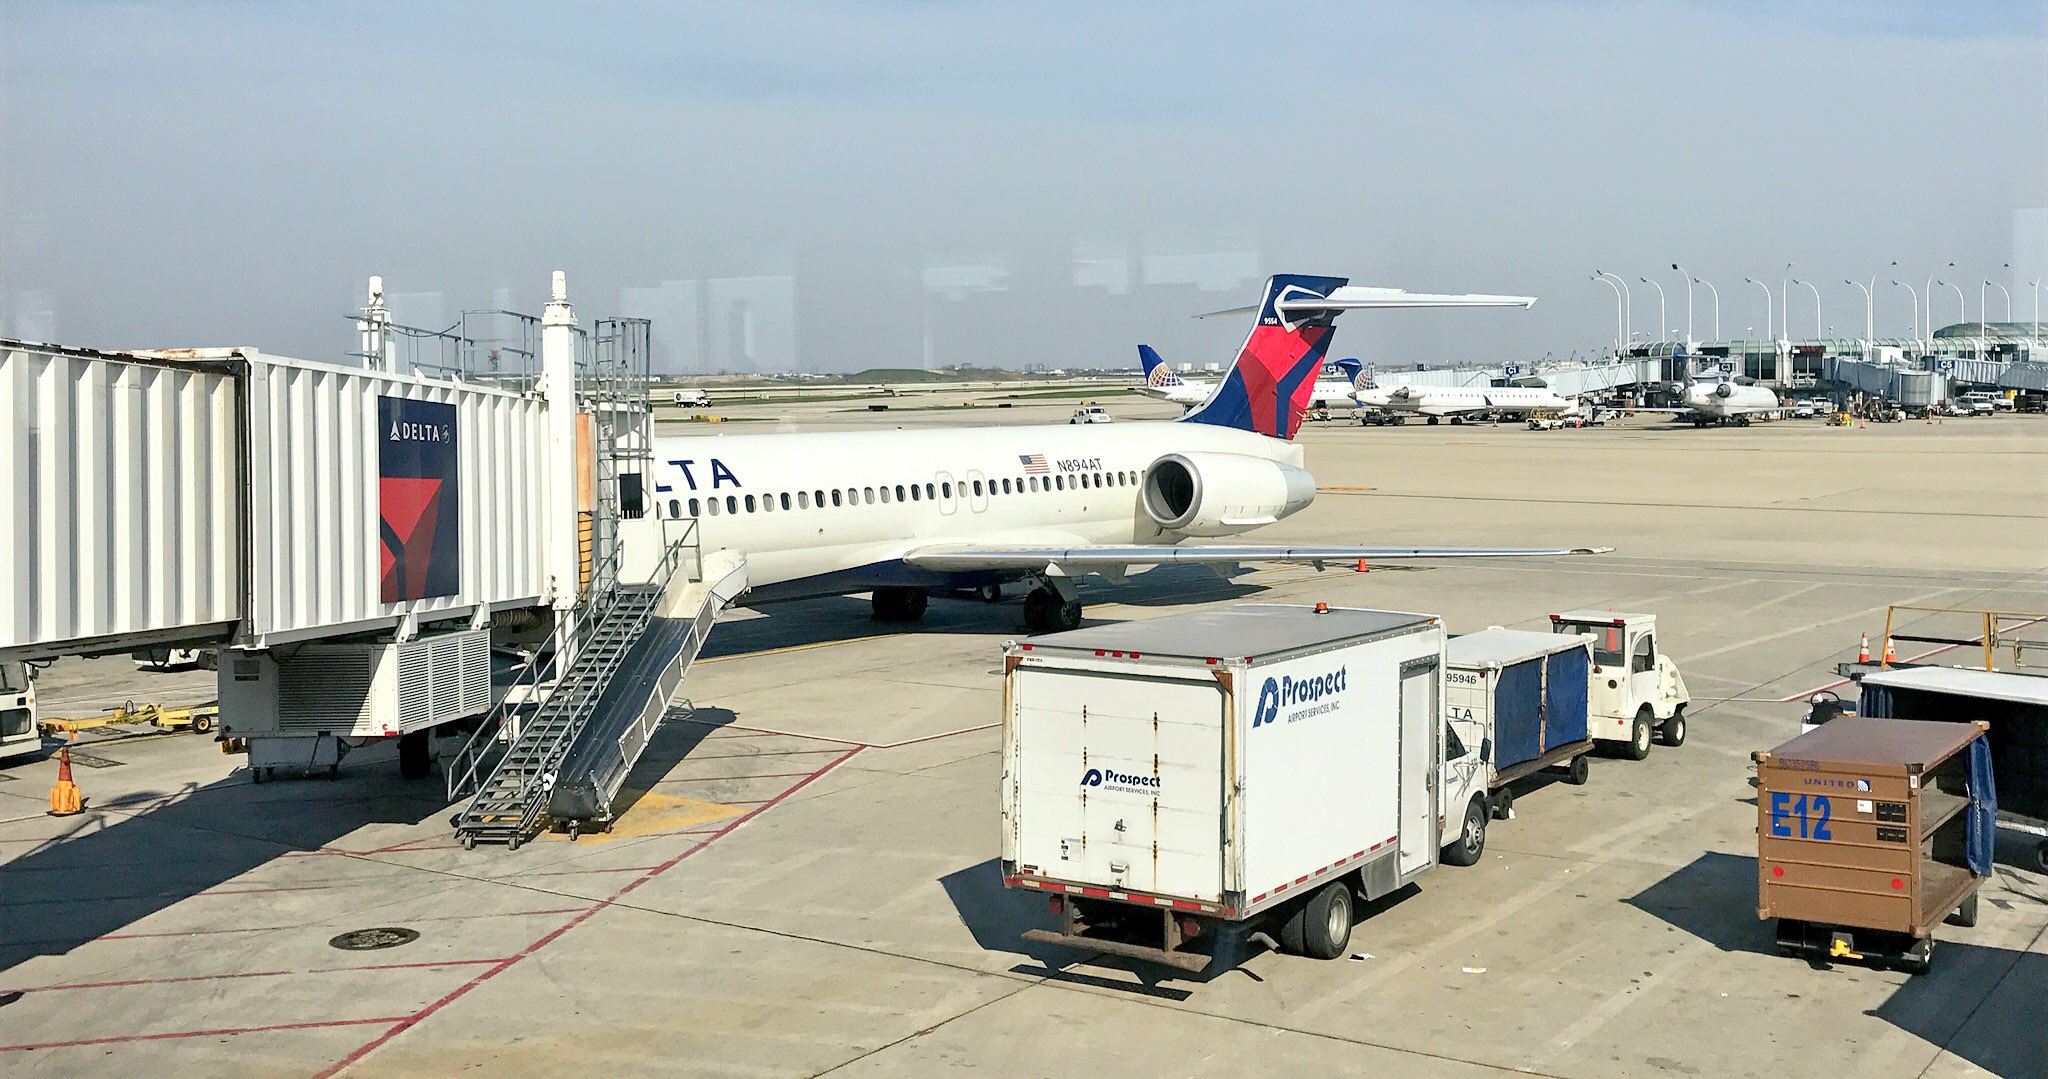 Delta Air Lines Boeing 717 at Chicago O'Hare